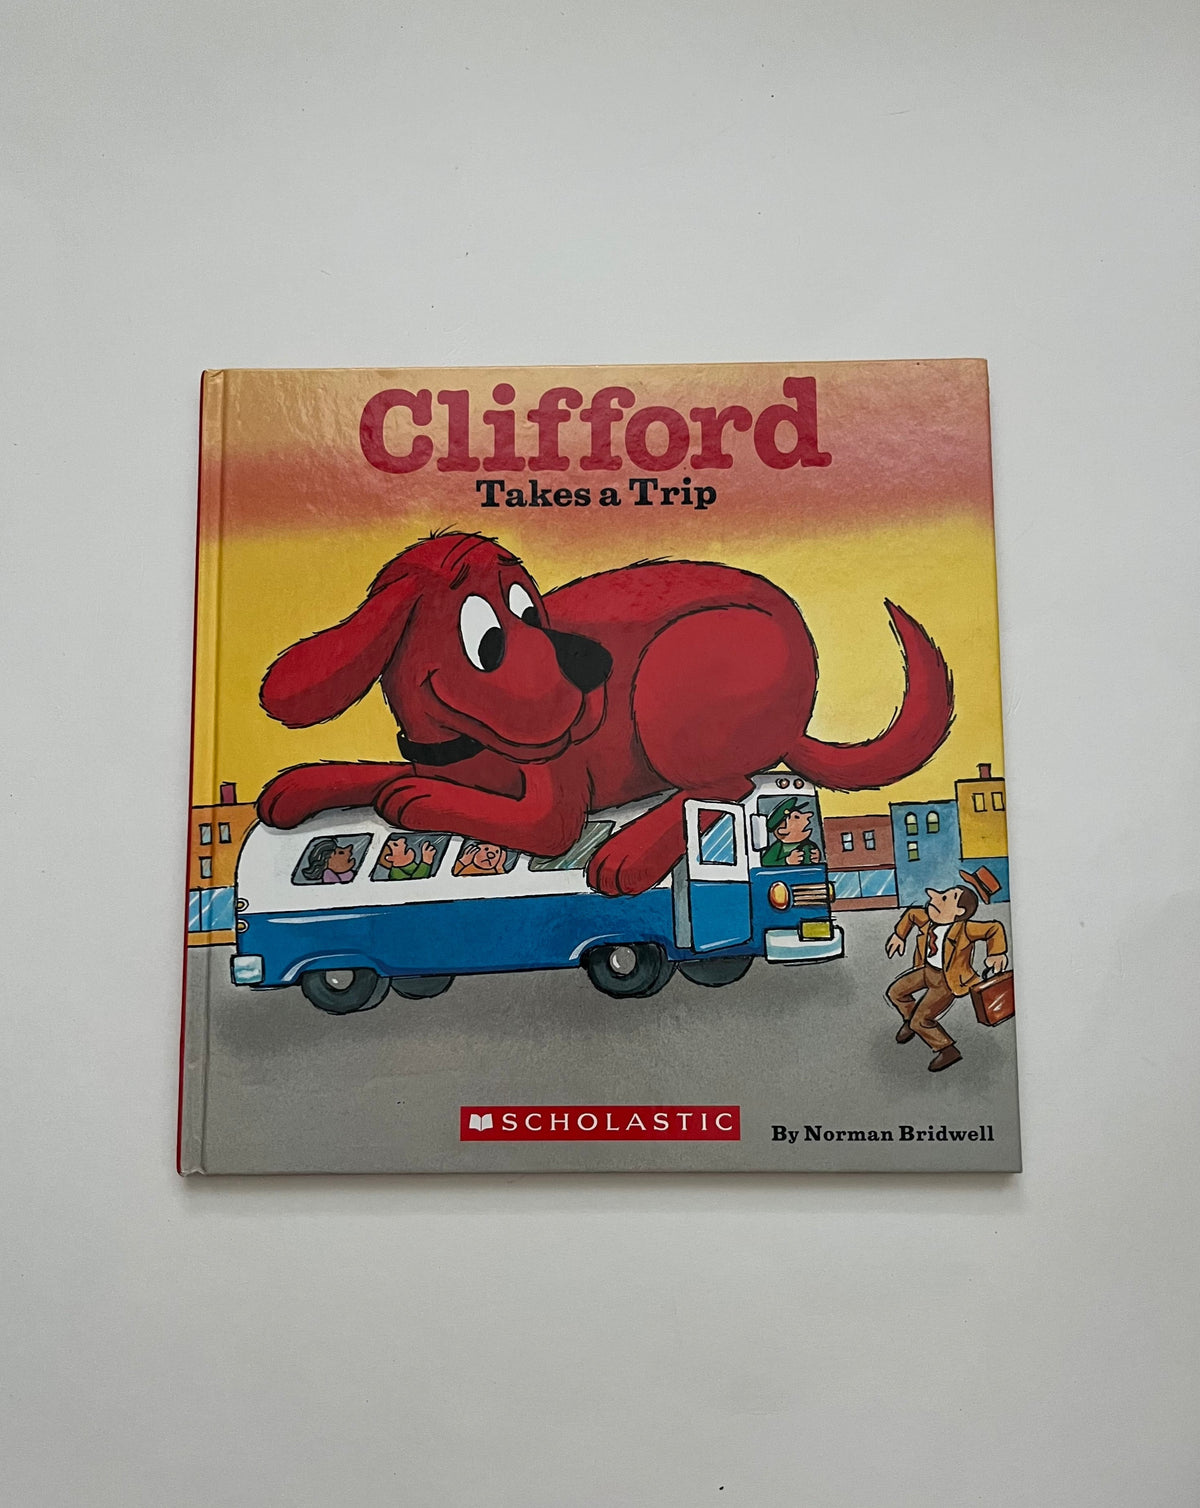 Clifford Takes a Trip by Norman Bridwell